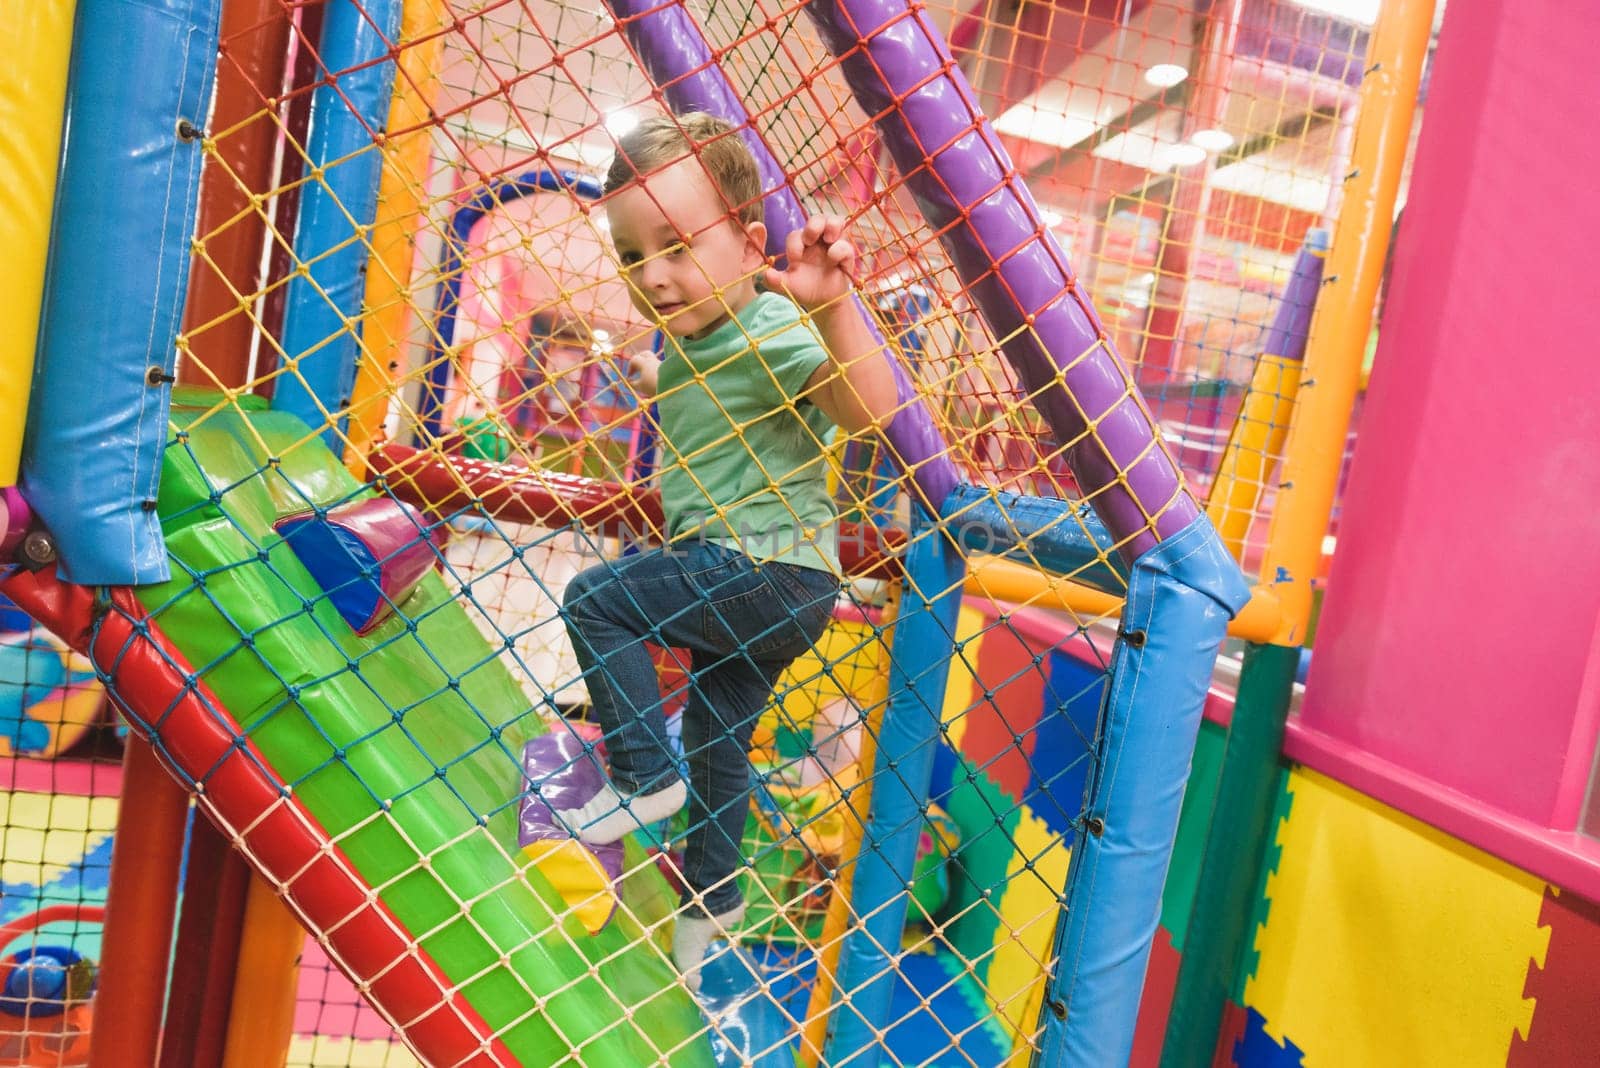 Indoor playground with colorful plastic balls for children.